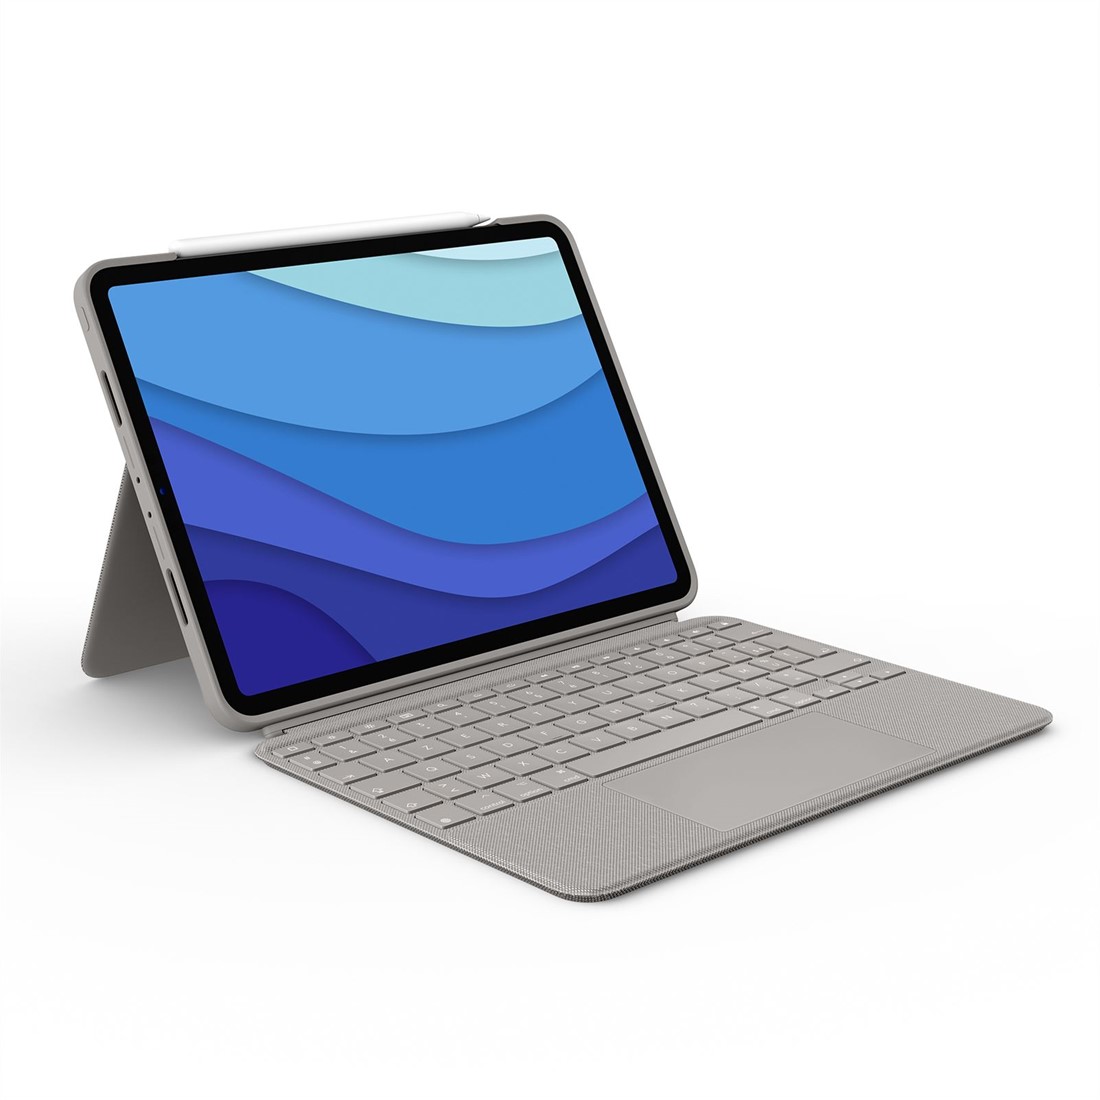 sirene Respectievelijk 945 Logitech Combo Touch for iPad Pro 11-inch (1st, 2nd, and 3rd generation)  bij ICT-Store.nl